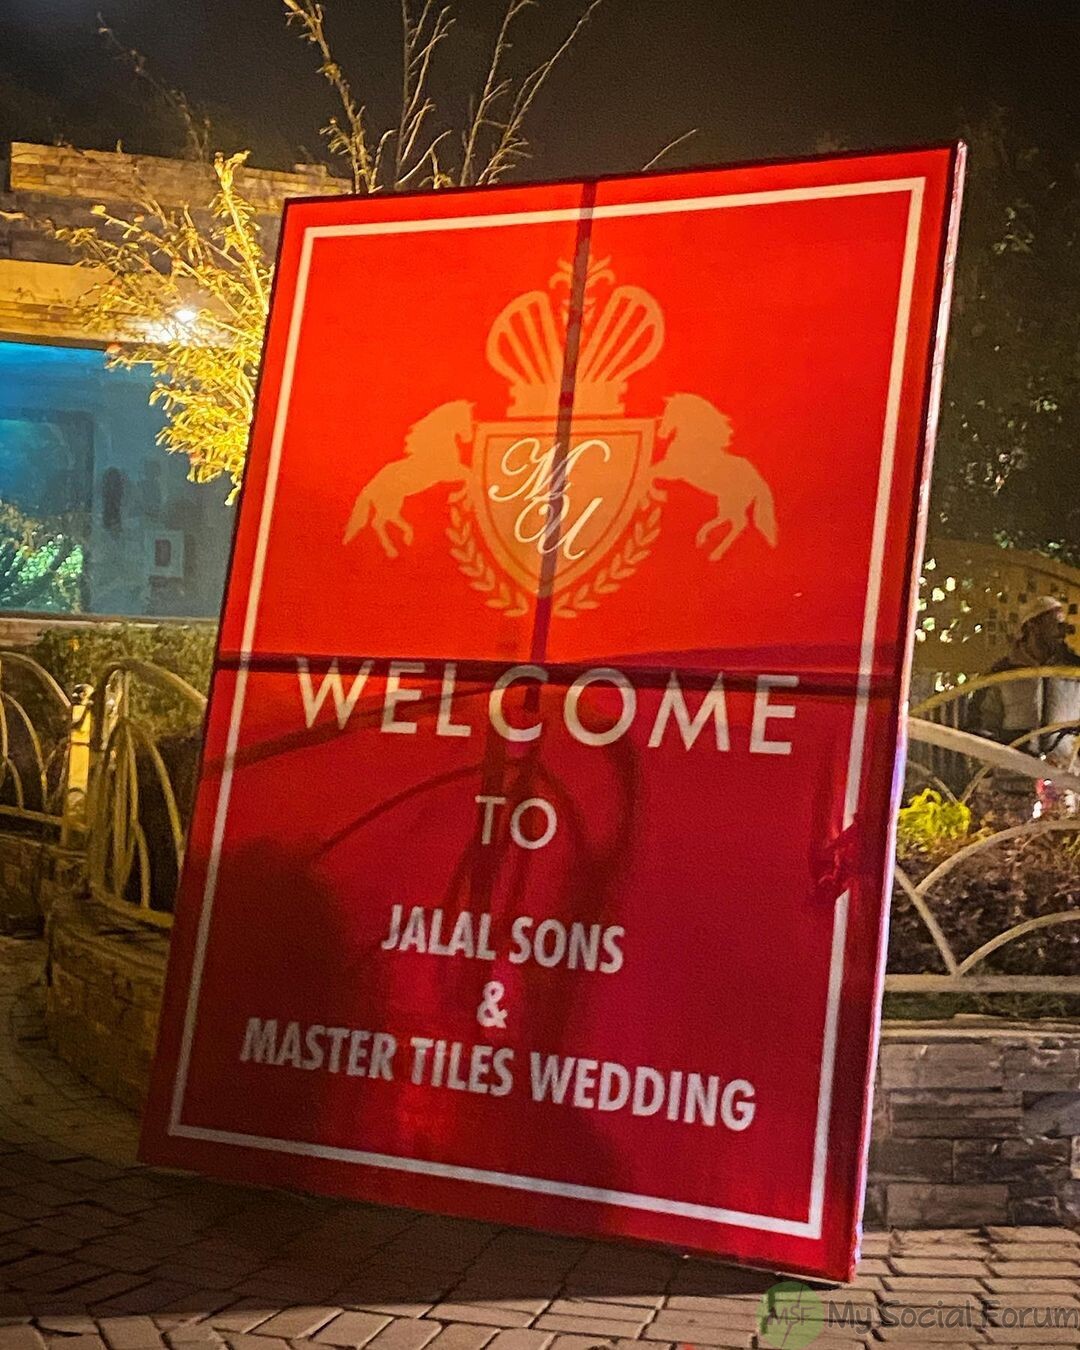 master tiles and jalal sons wedding